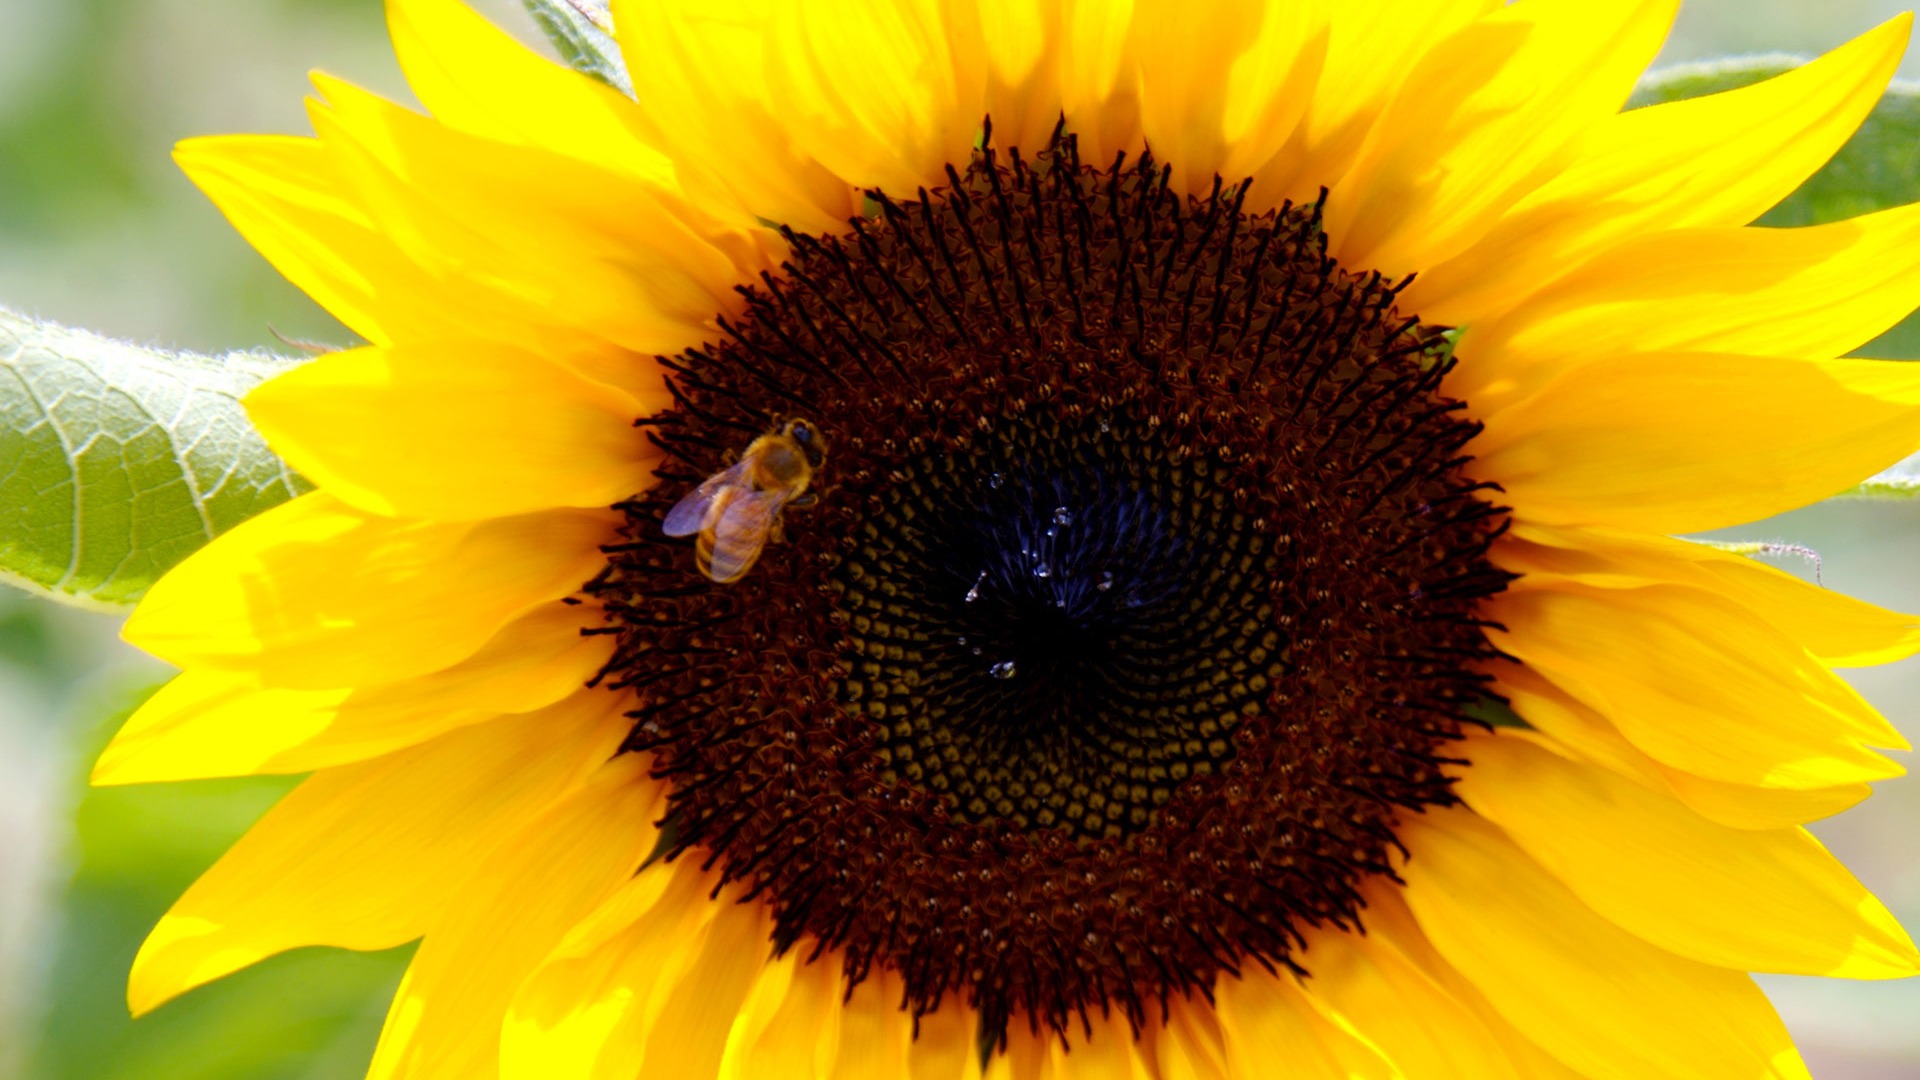 Sunny sunflower photo HD Wallpapers #24 - 1920x1080